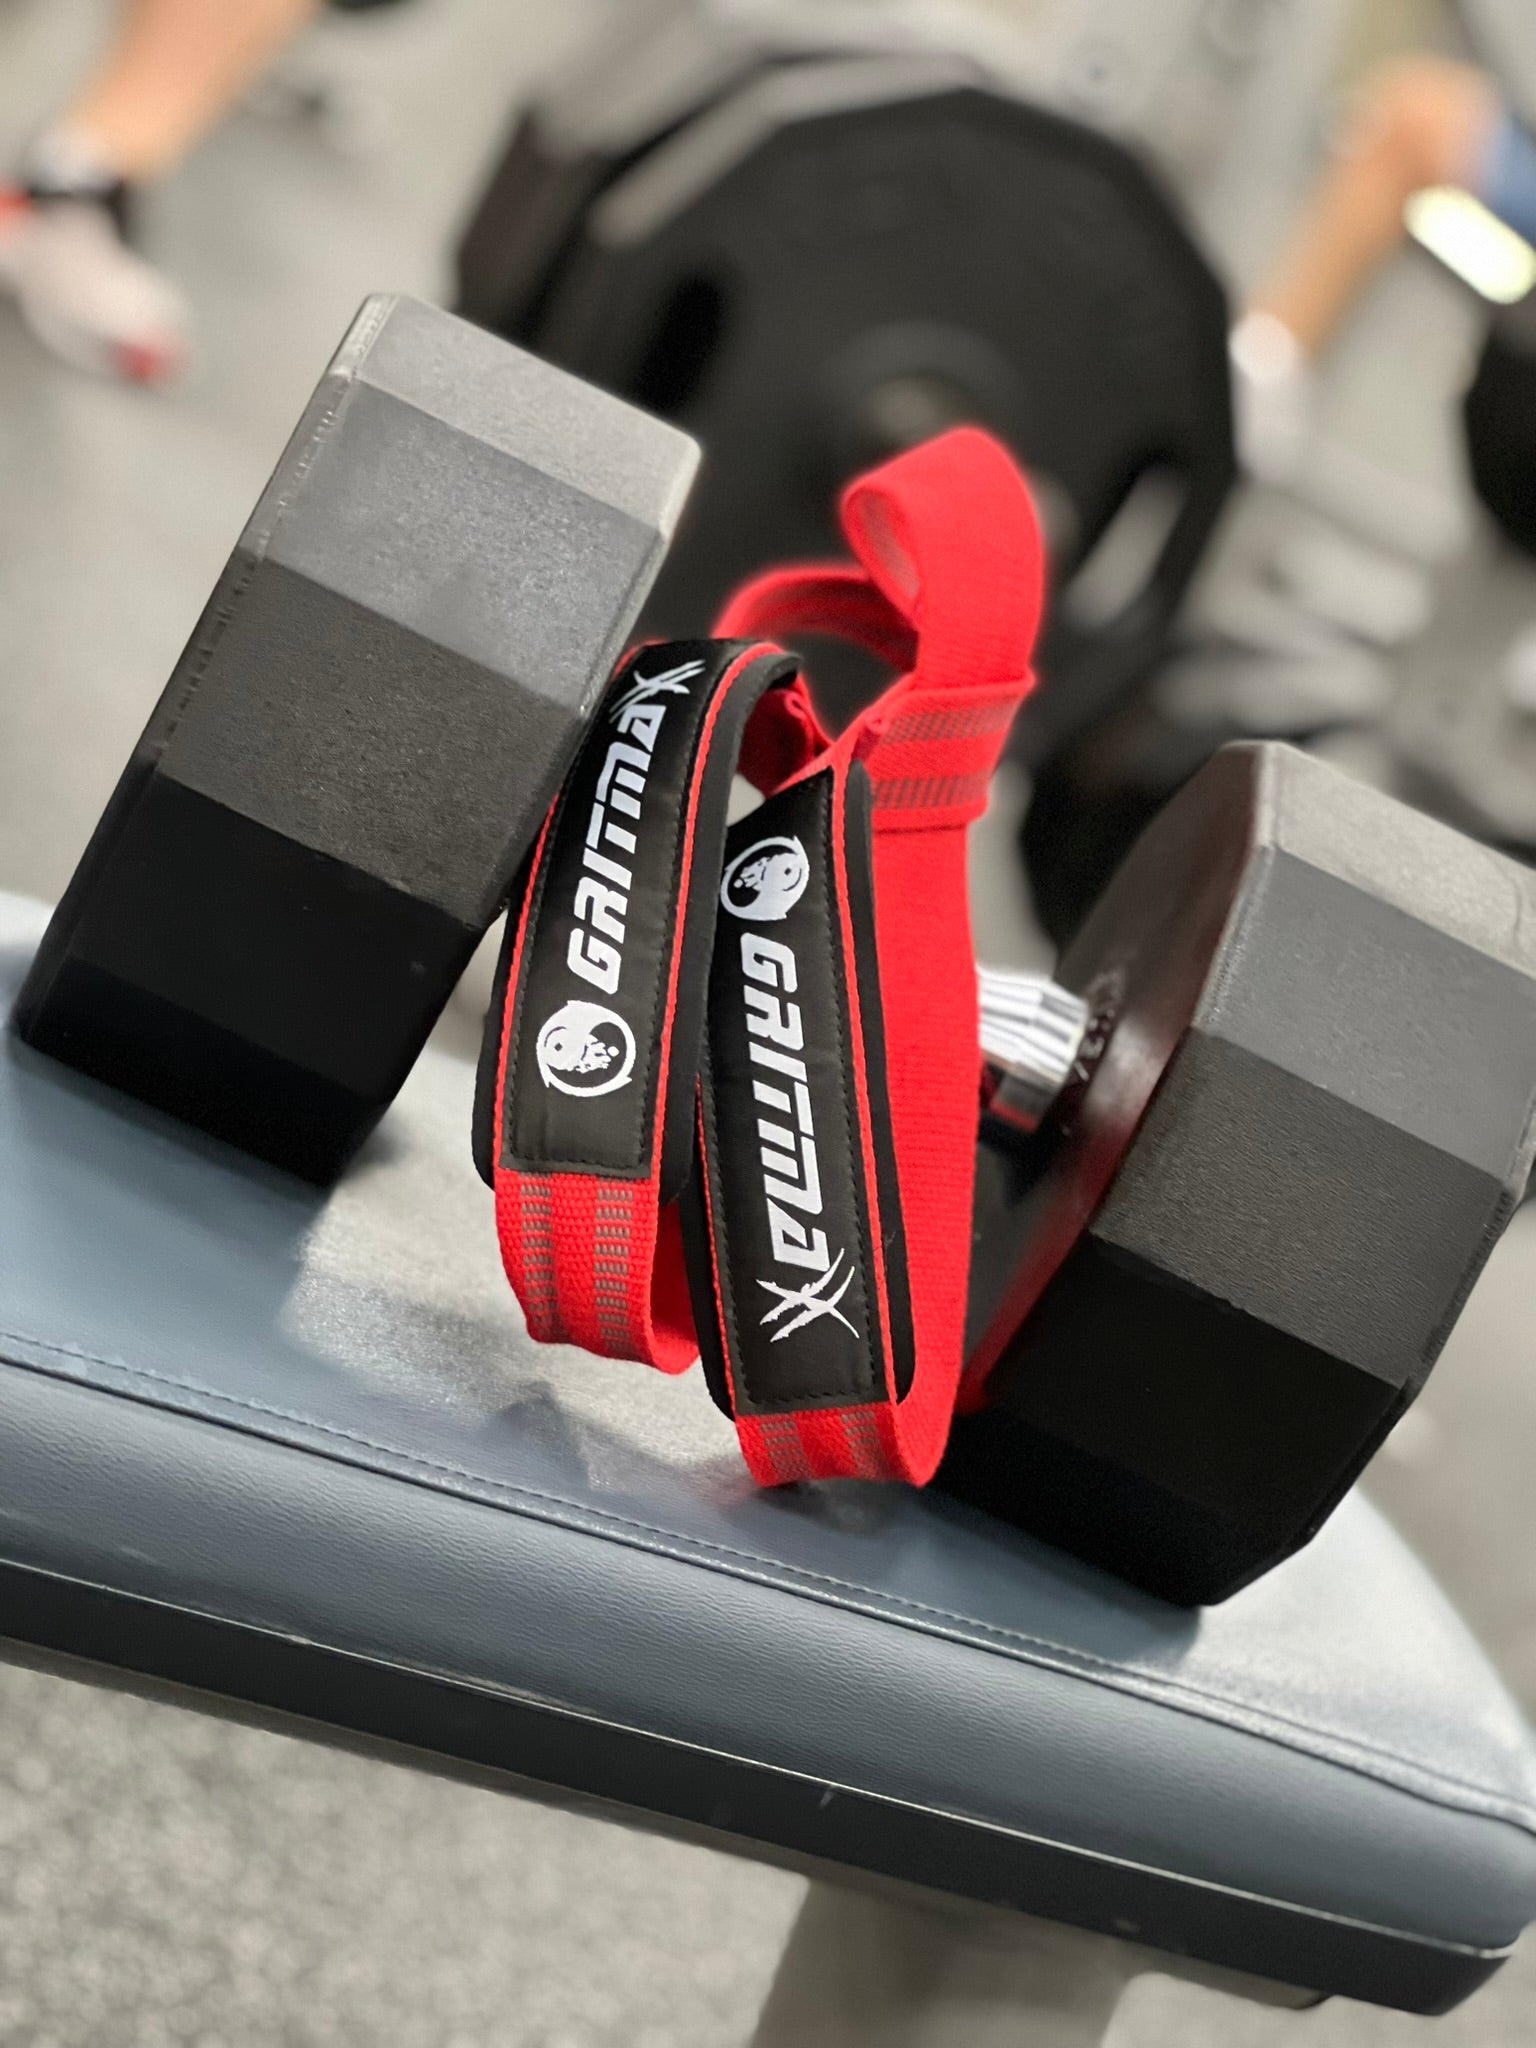 GRITMAXX LIFTING STRAPS 24"-RED - GRIT GEAR